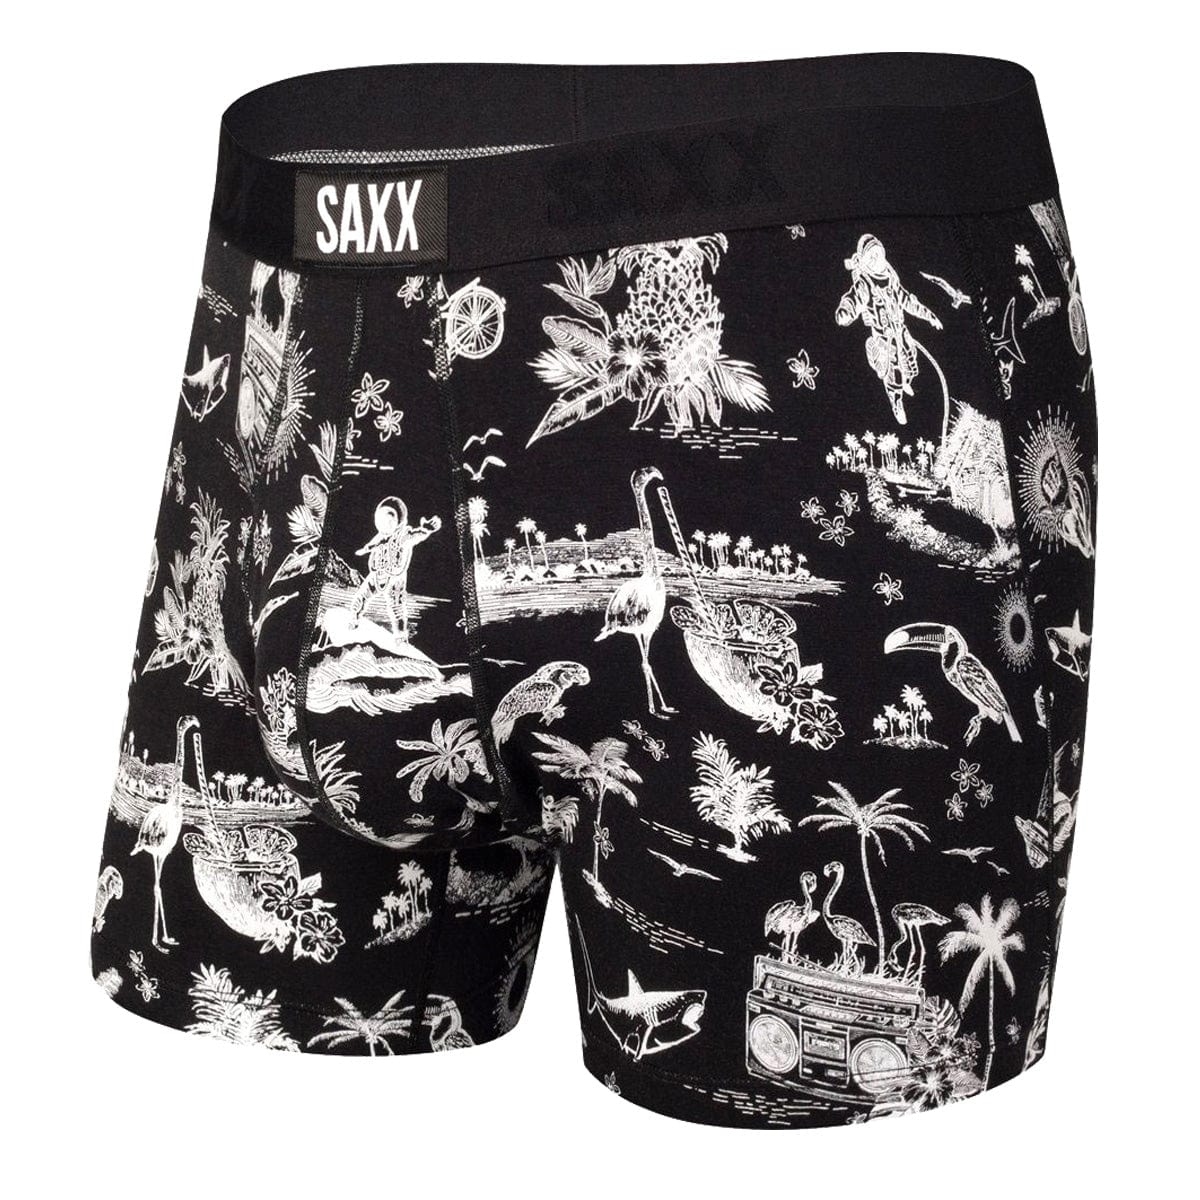 Saxx Ultra Boxers - Black Astro Surf & Turf - The Hockey Shop Source For Sports